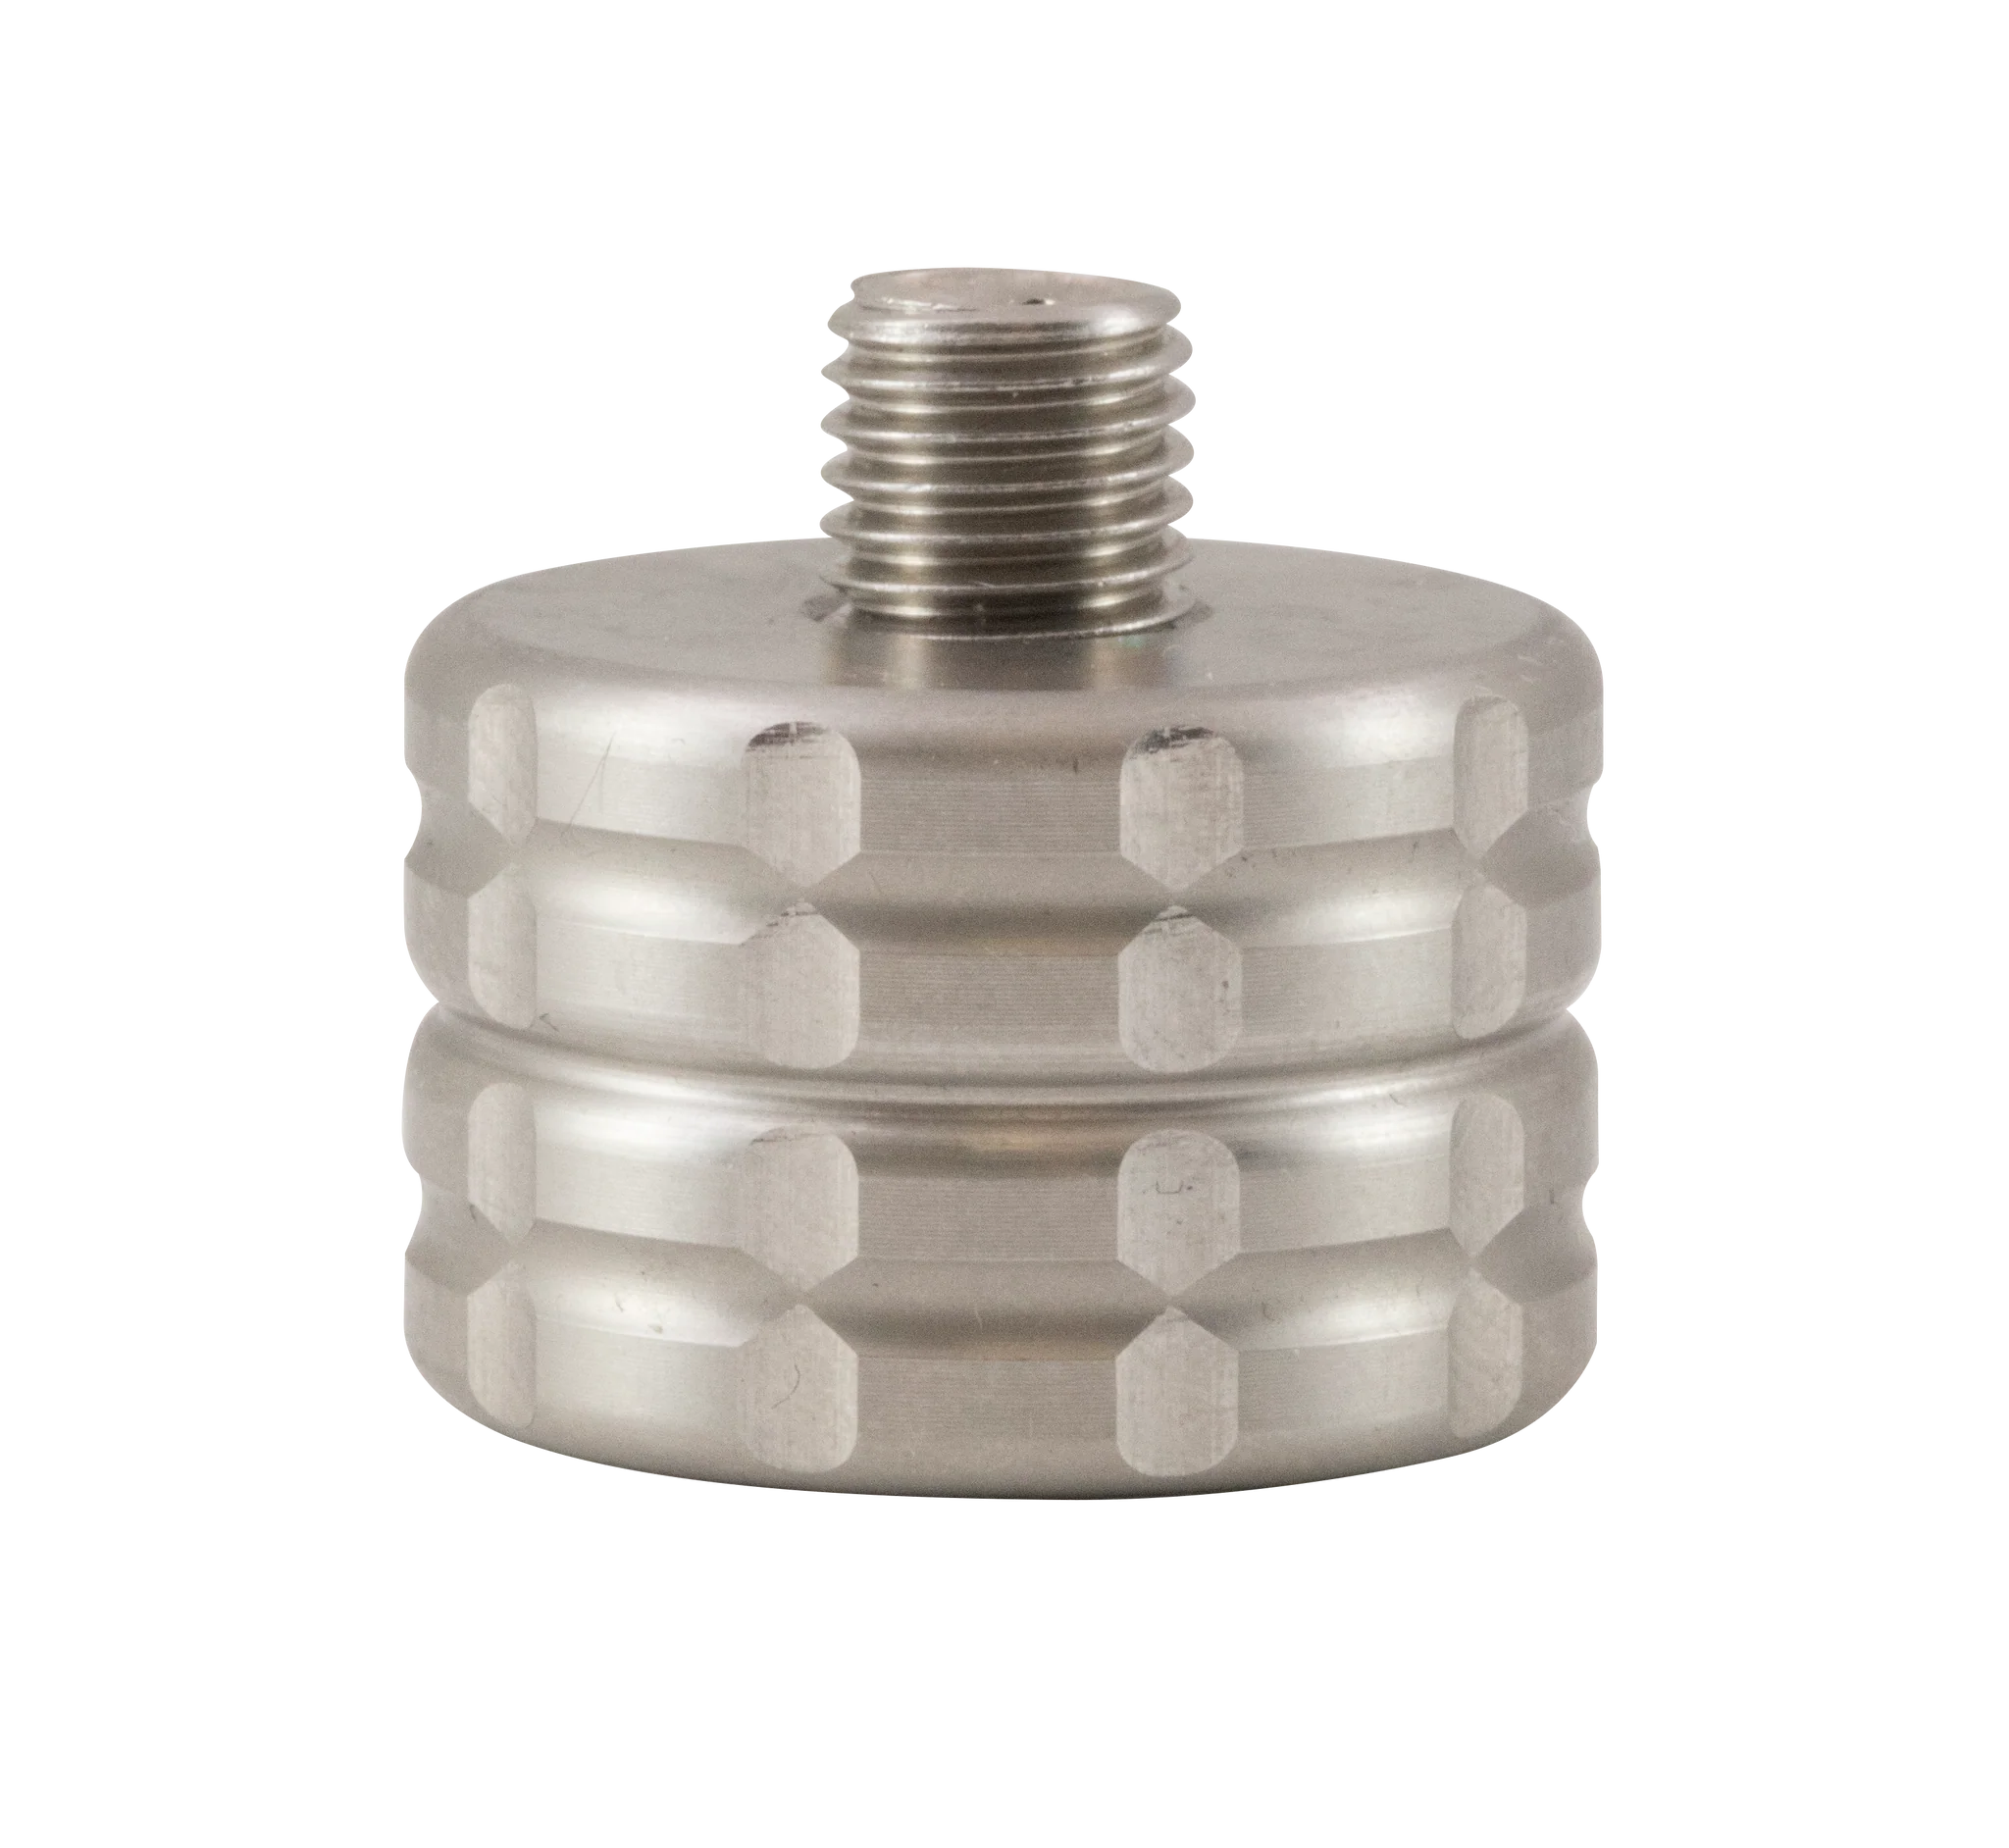 Axcel 1.25" Stainless Steel Weight (4 oz) Axcel